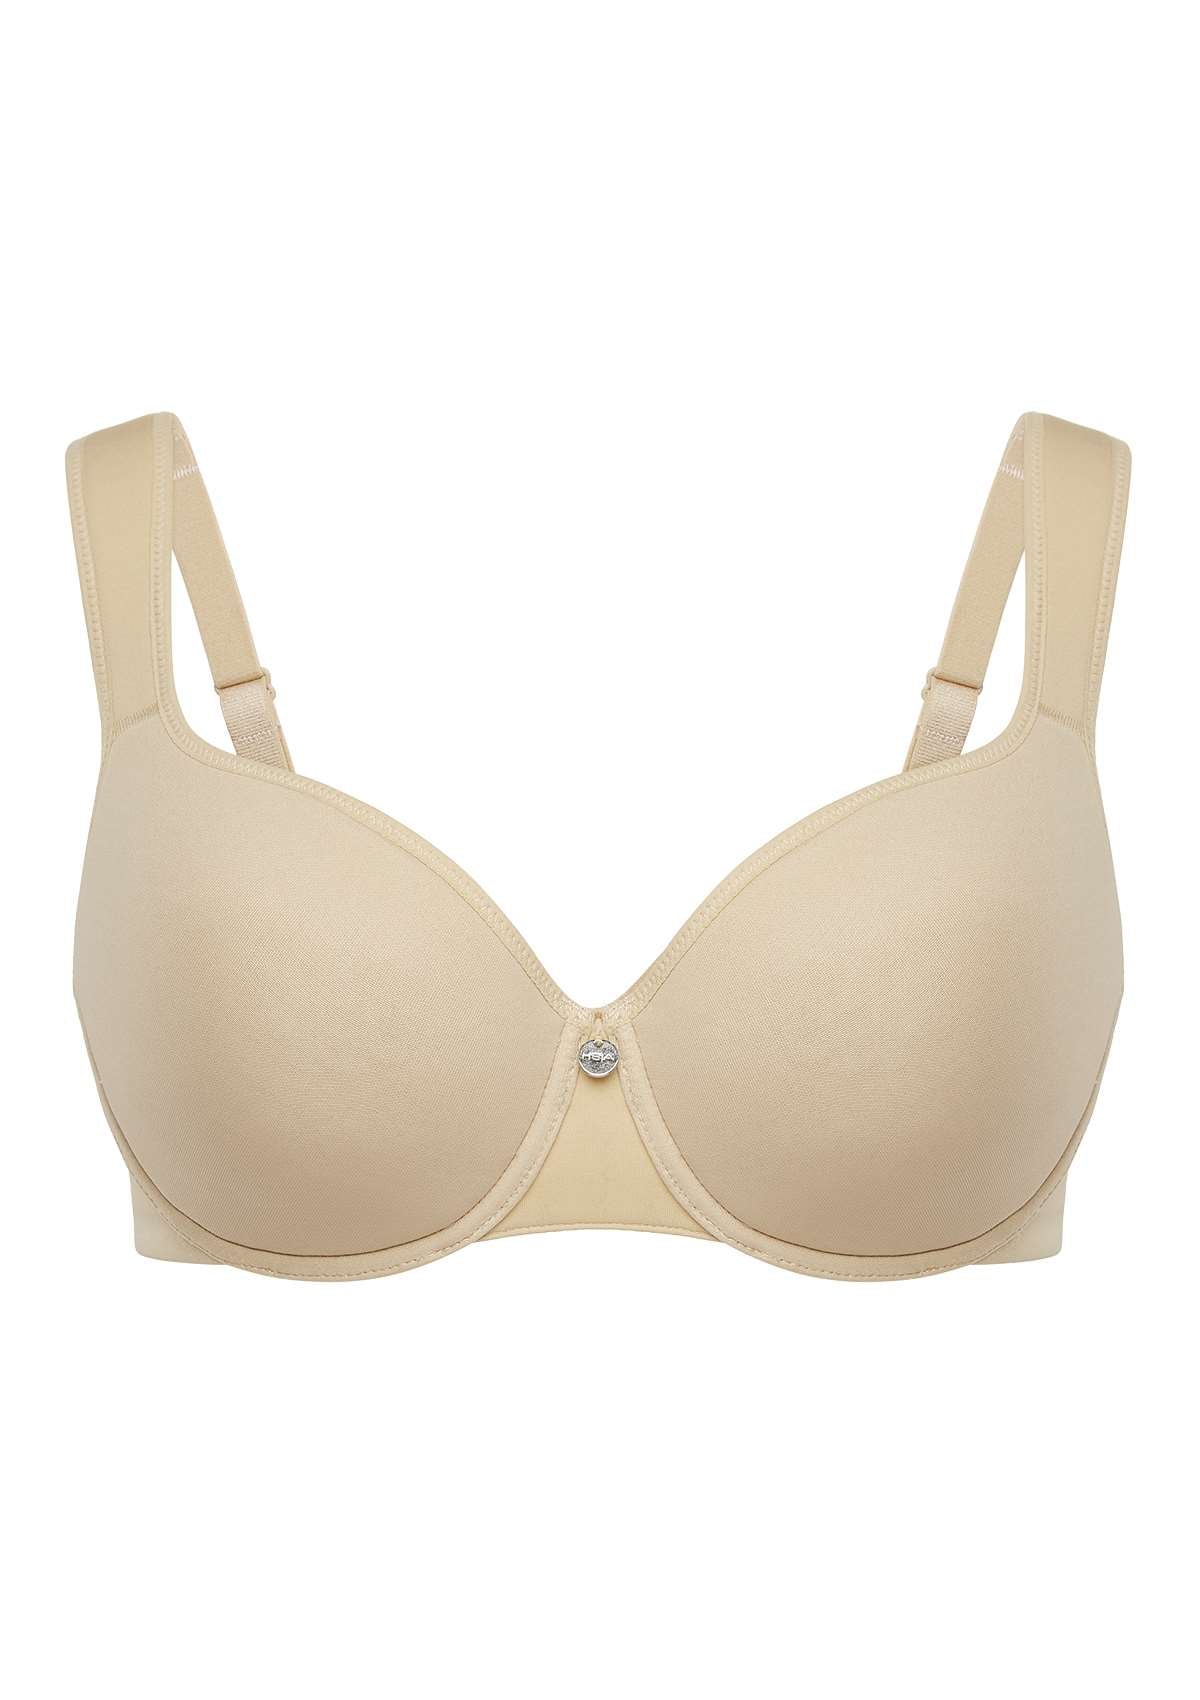 HSIA Patricia Seamless Lightly Padded Minimizer Bra -for Bigger Busts - Beige / 42 / DDD/F